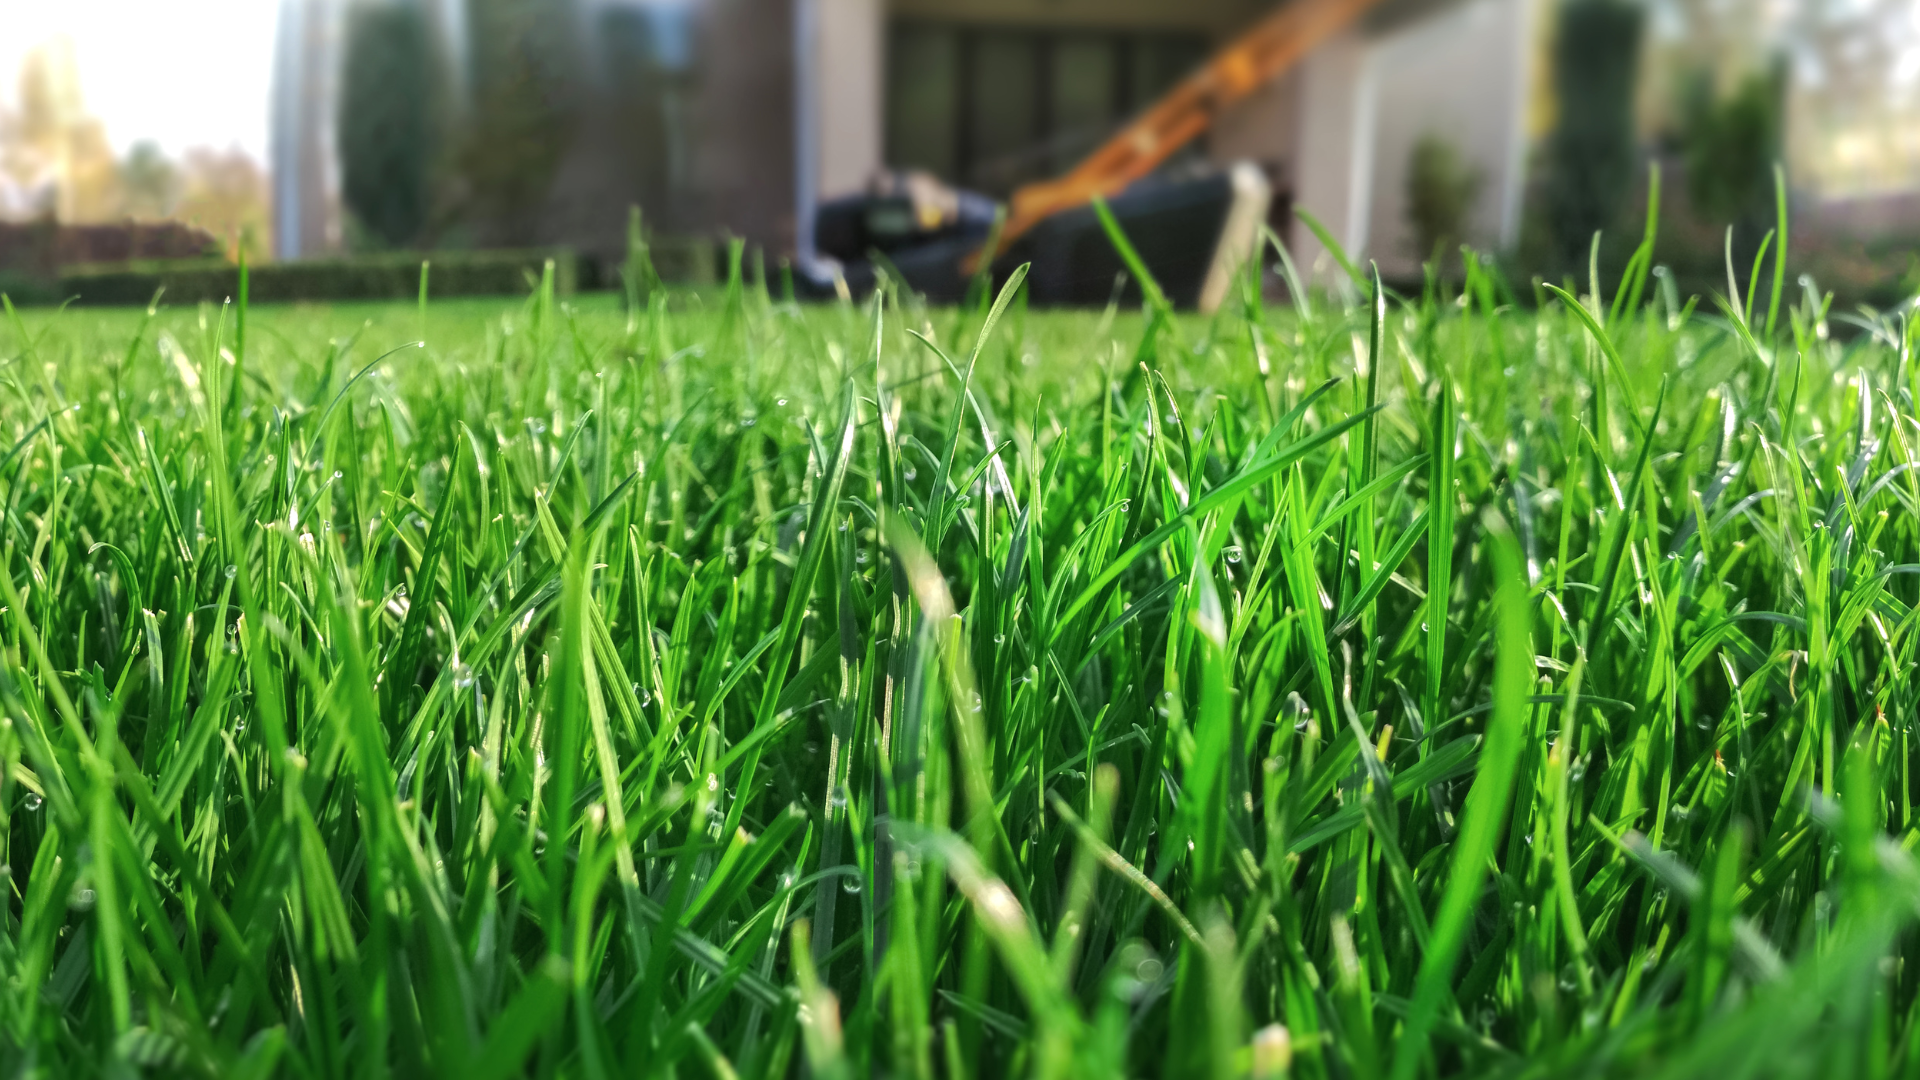 If you're reading this, chances are you've heard about the No Mow May movement that's been gaining ...